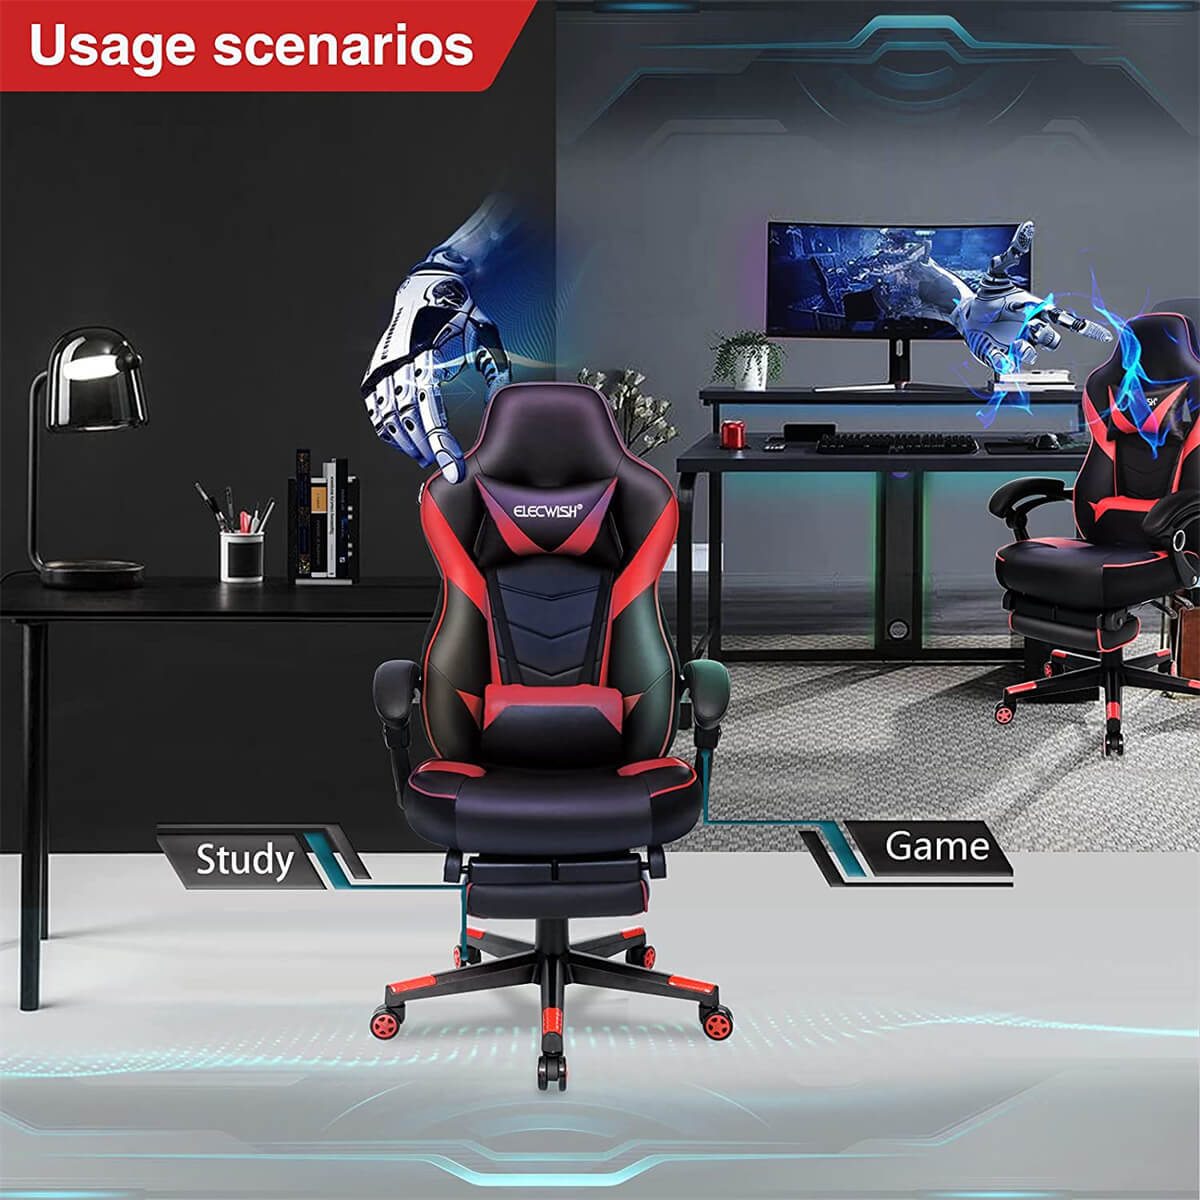 Elecwish Video Game Chairs Red Gaming Chair With Footrest OC087 displays situation